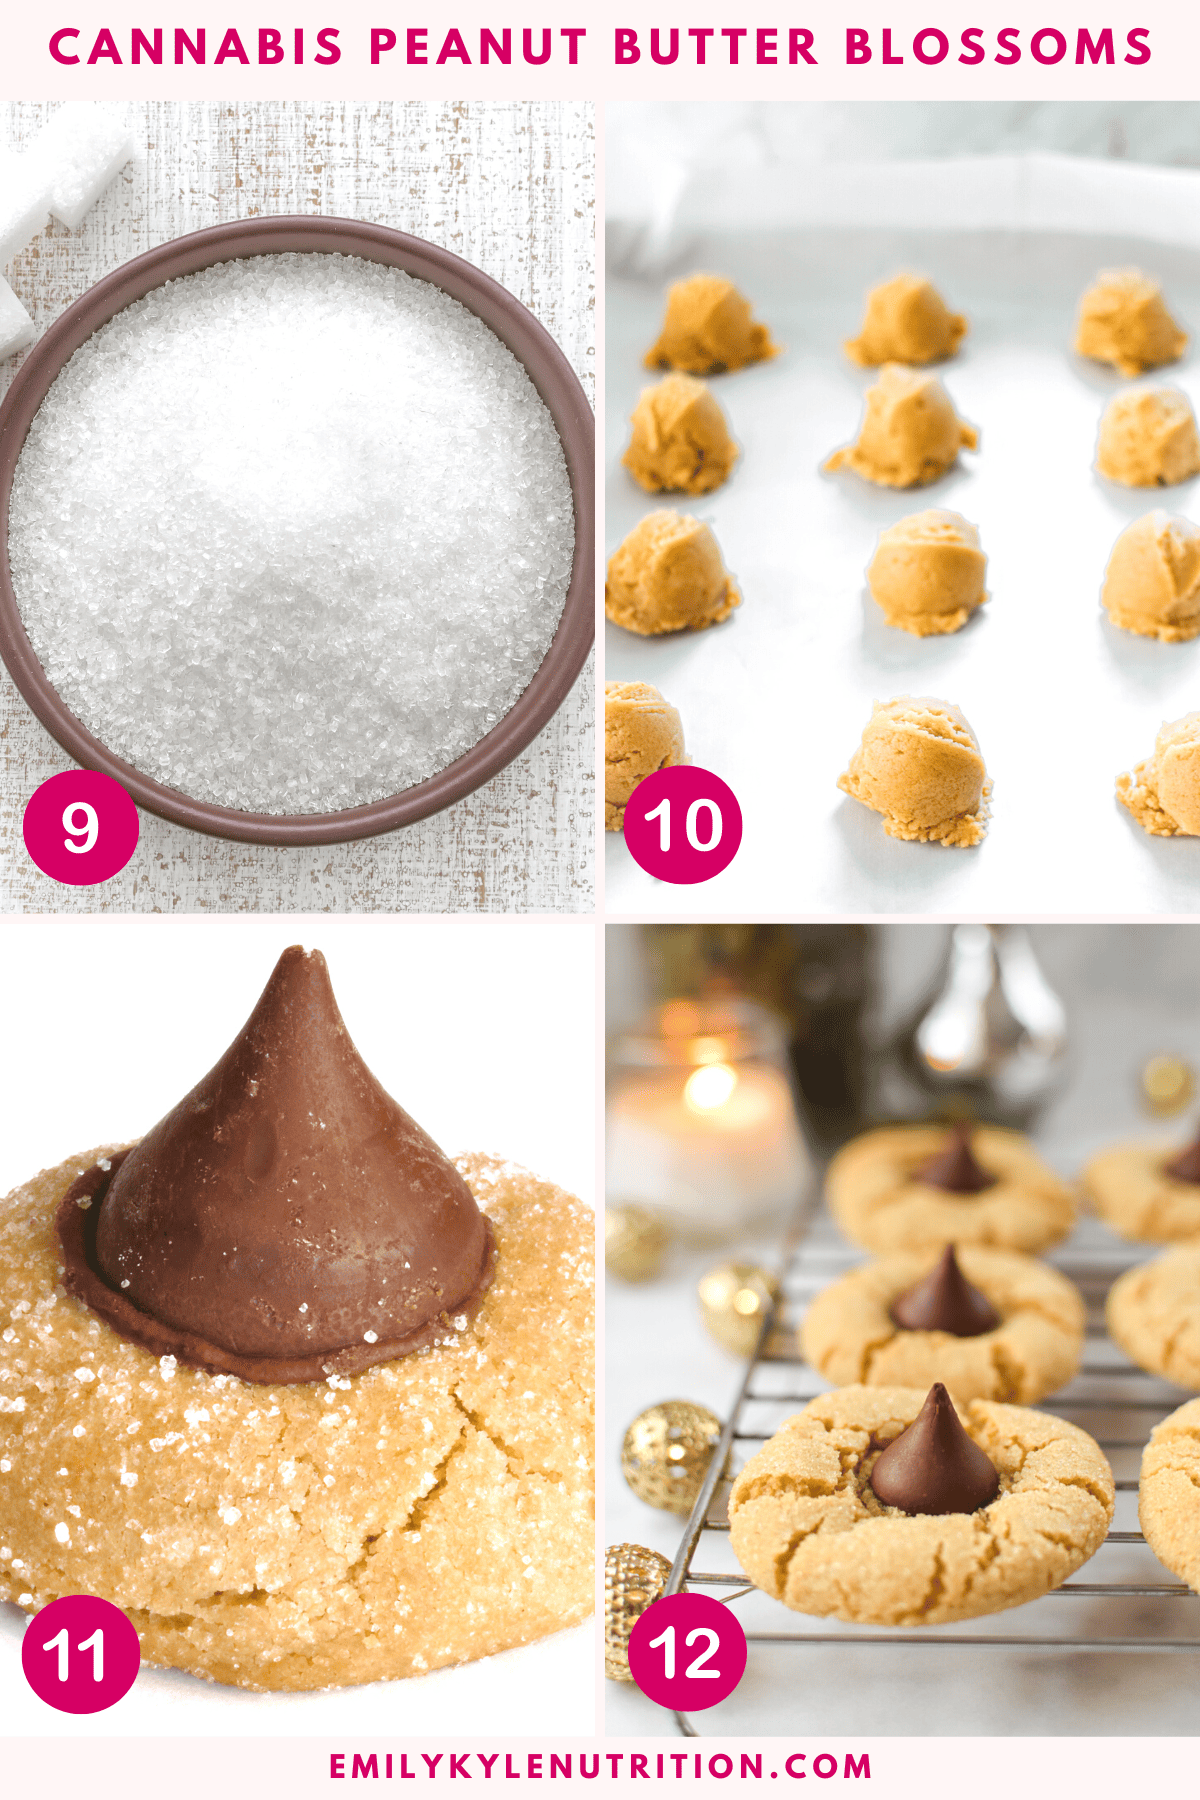 The last four steps for making cannabis peanut butter blossoms. 